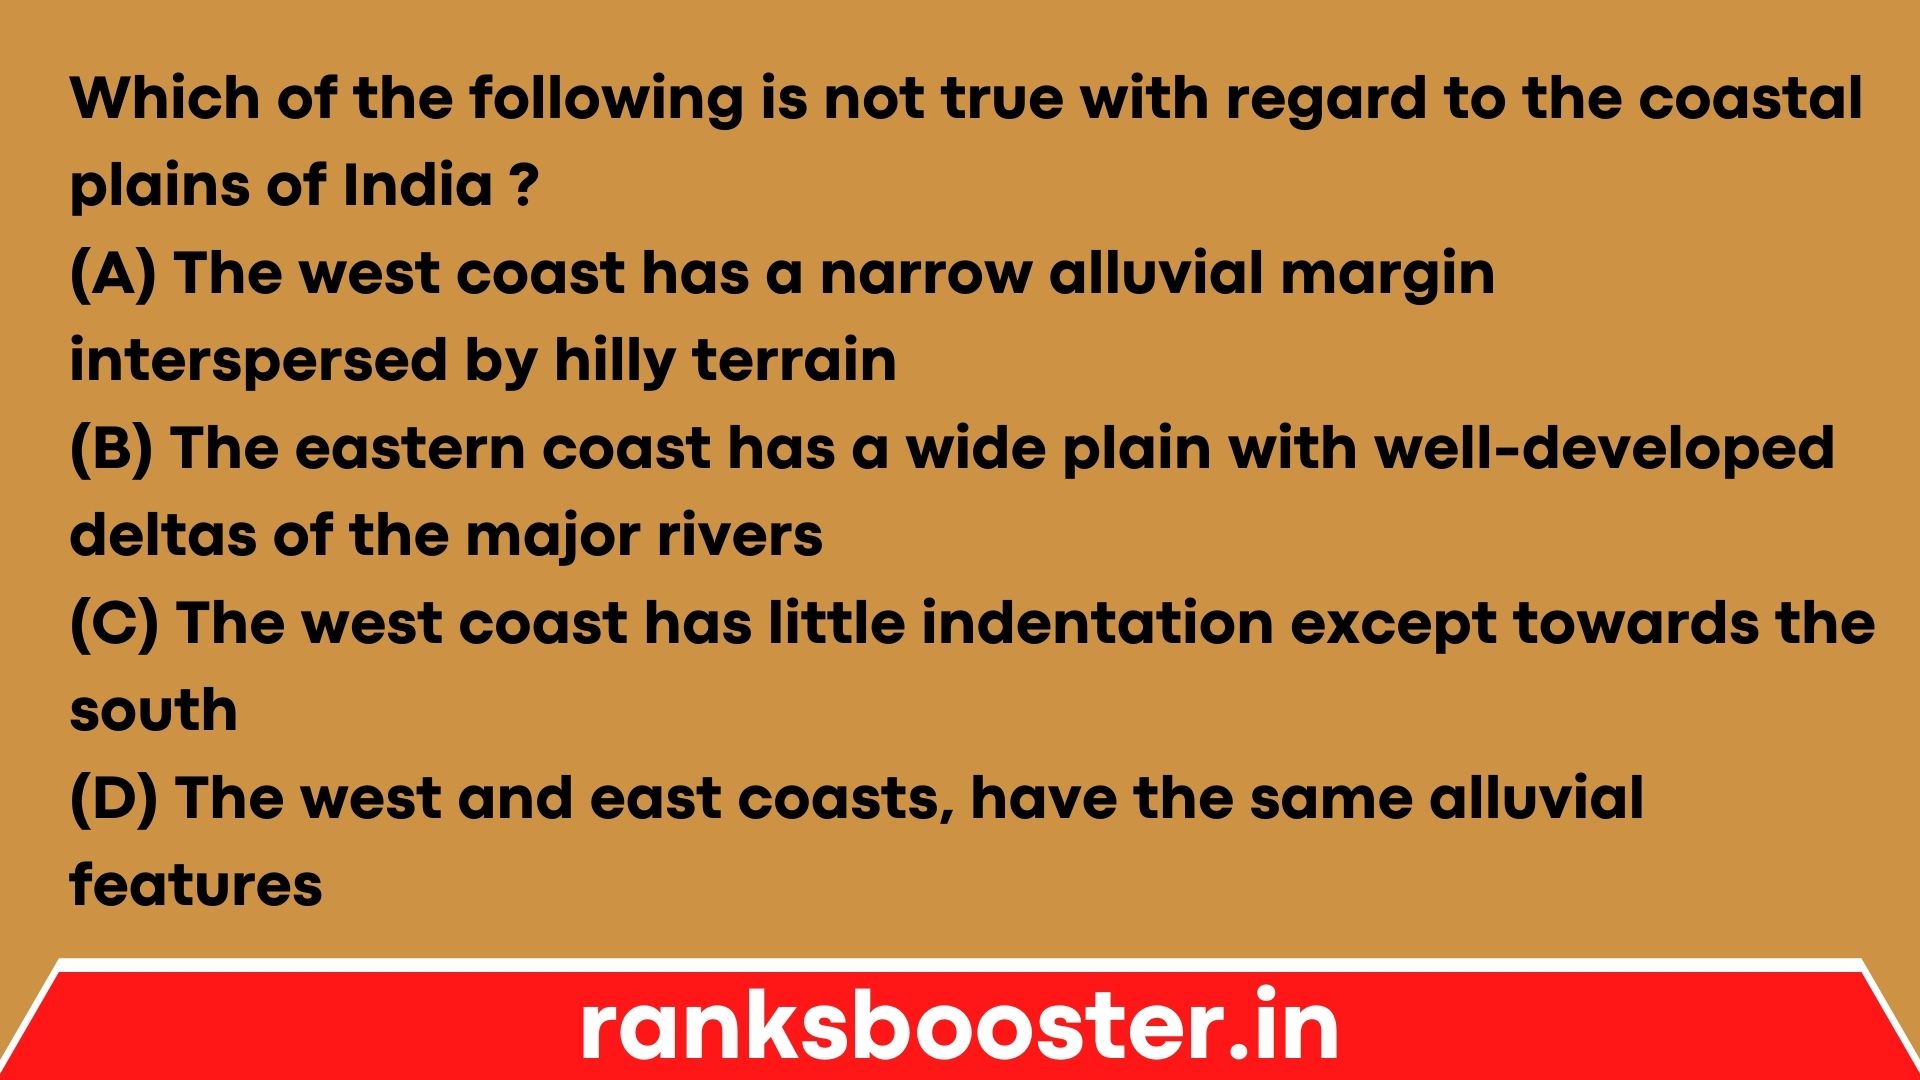 Which of the following is not true with regard to the coastal plains of India ? (A) The west coast has a narrow alluvial margin interspersed by hilly terrain (B) The eastern coast has a wide plain with well-developed deltas of the major rivers (C) The west coast has little indentation except towards the south (D) The west and east coasts, have the same alluvial features